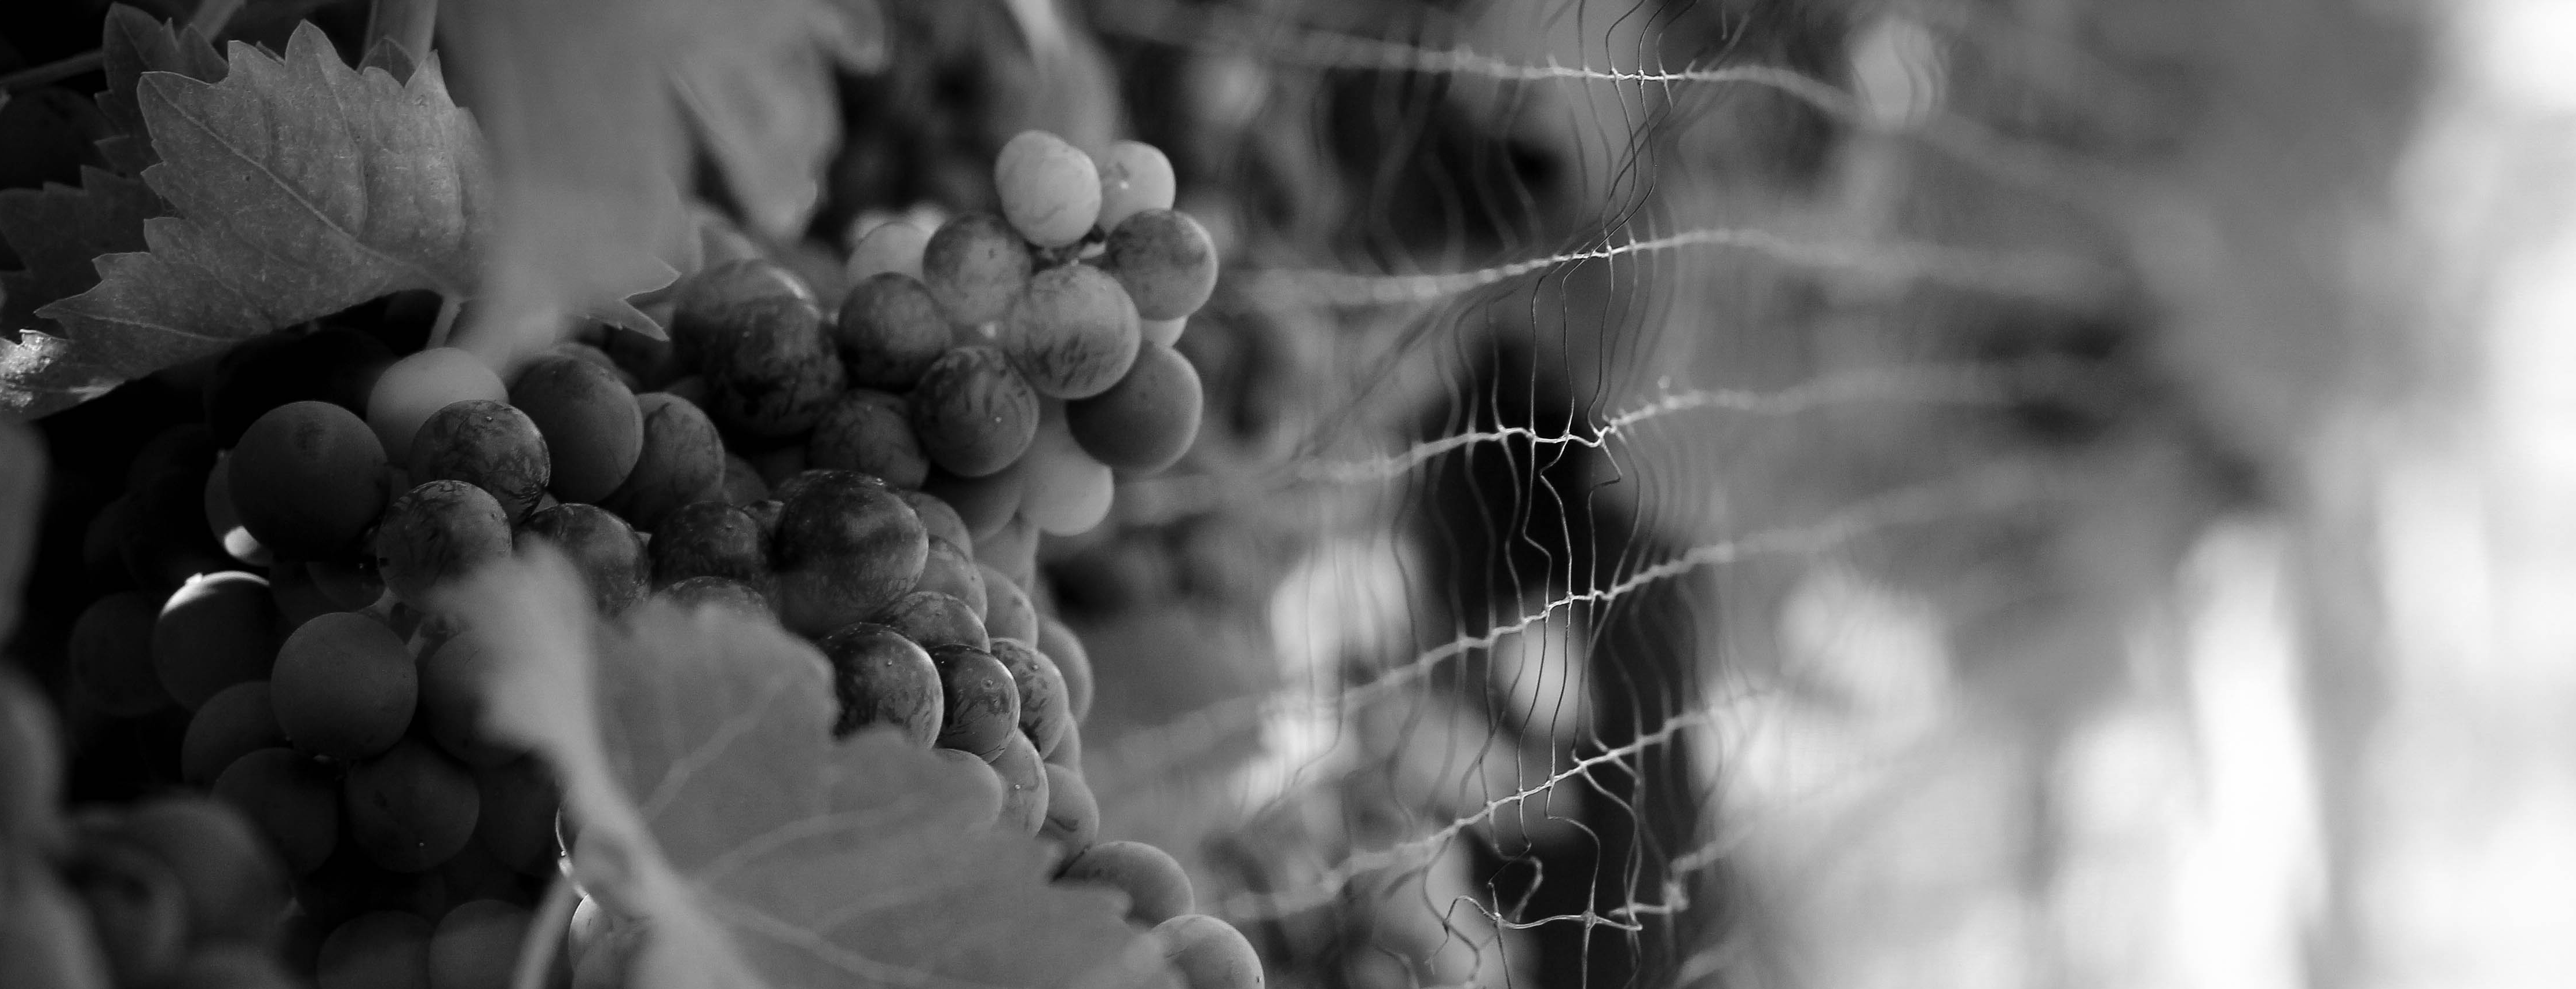 Image of grapes on vine at Kathryn Kennedy Winery